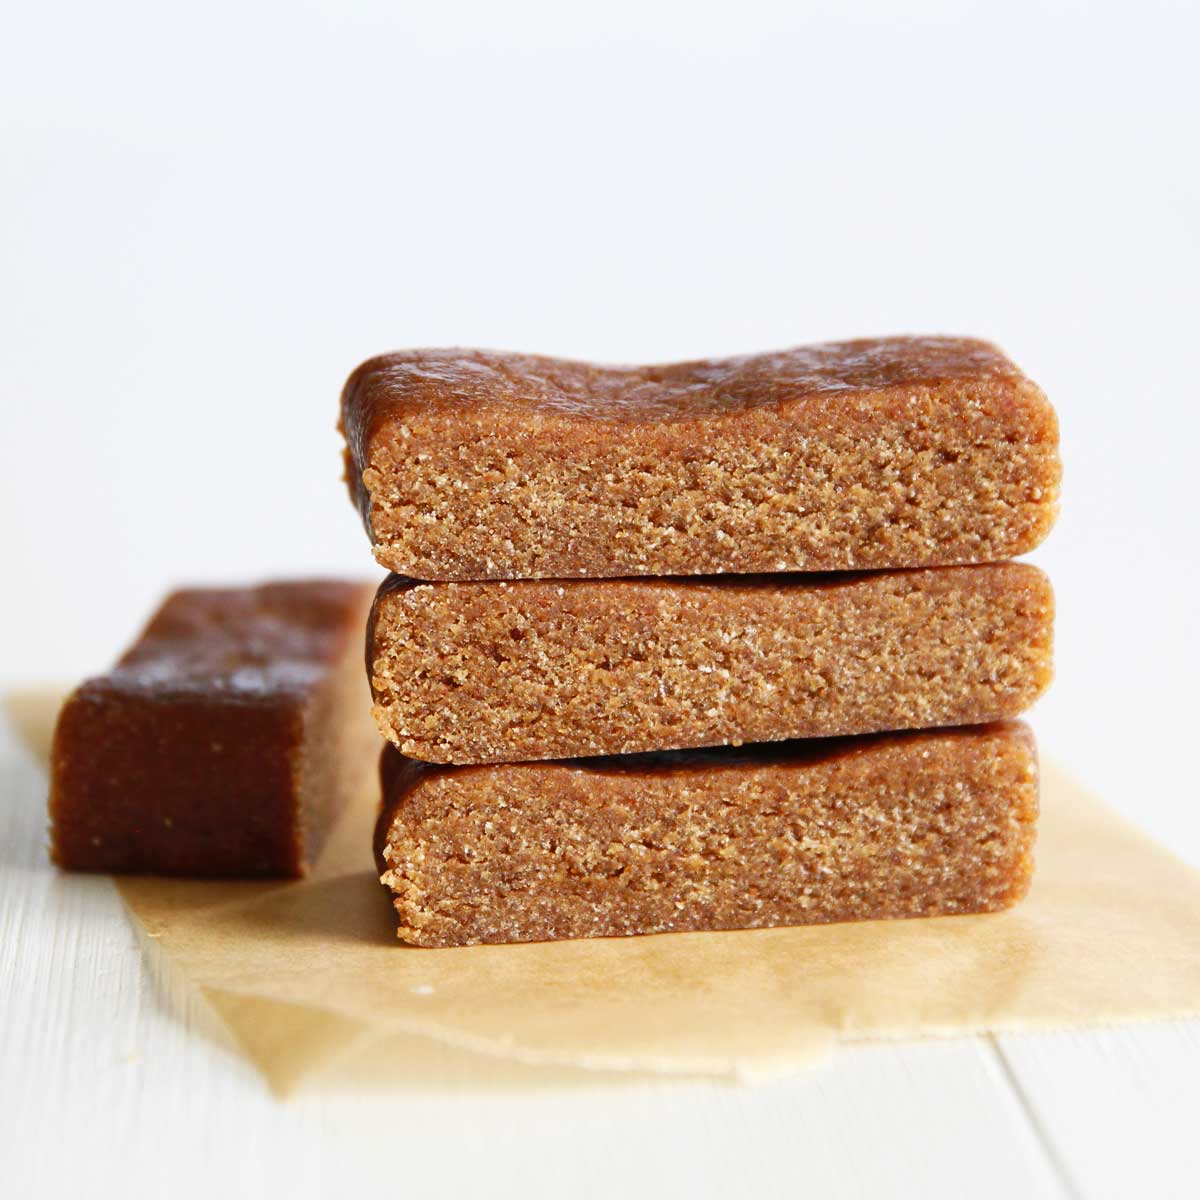 Gingerbread Collagen Protein Bars: a Healthier Festive Snack - Canned Chickpea Yeast Bread